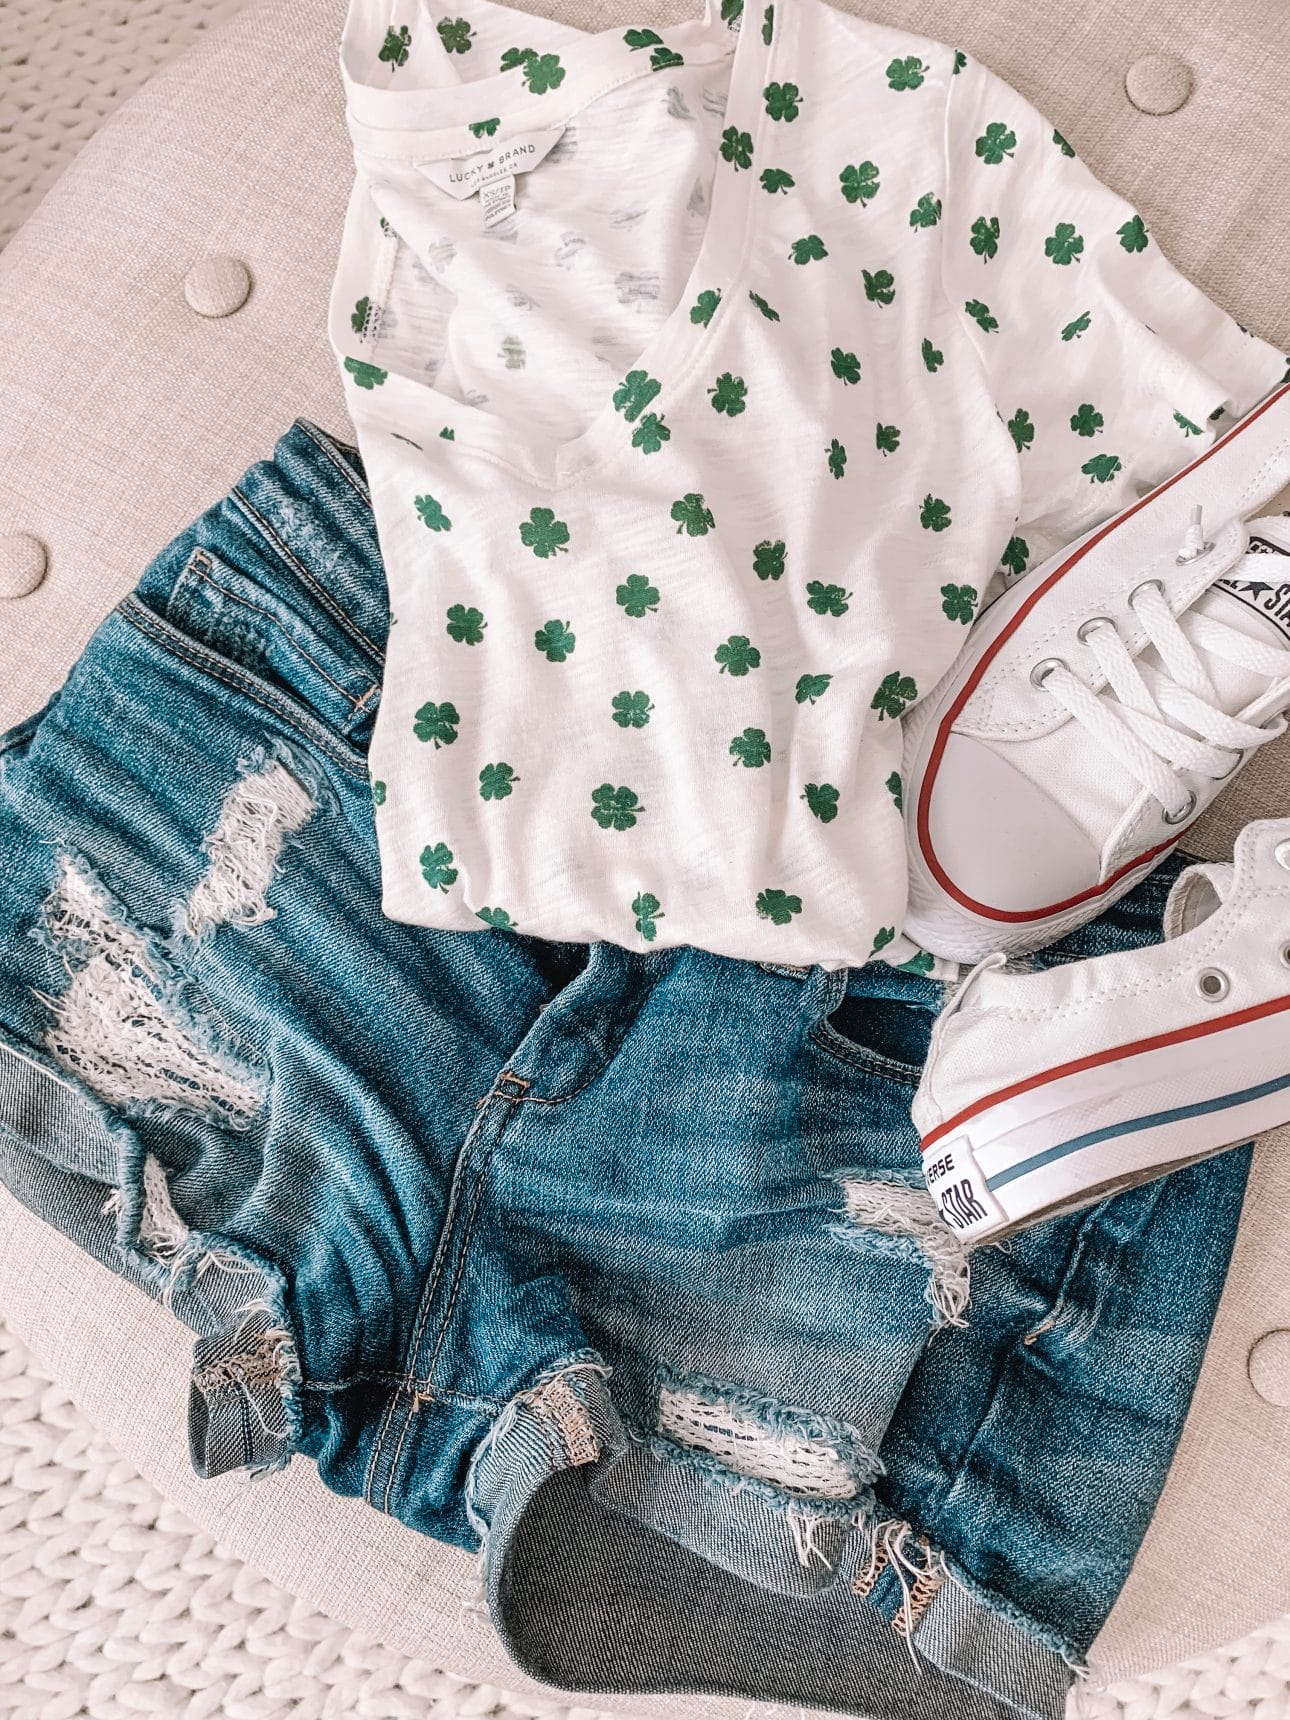 Clover t-shirt and jean shorts with converse 